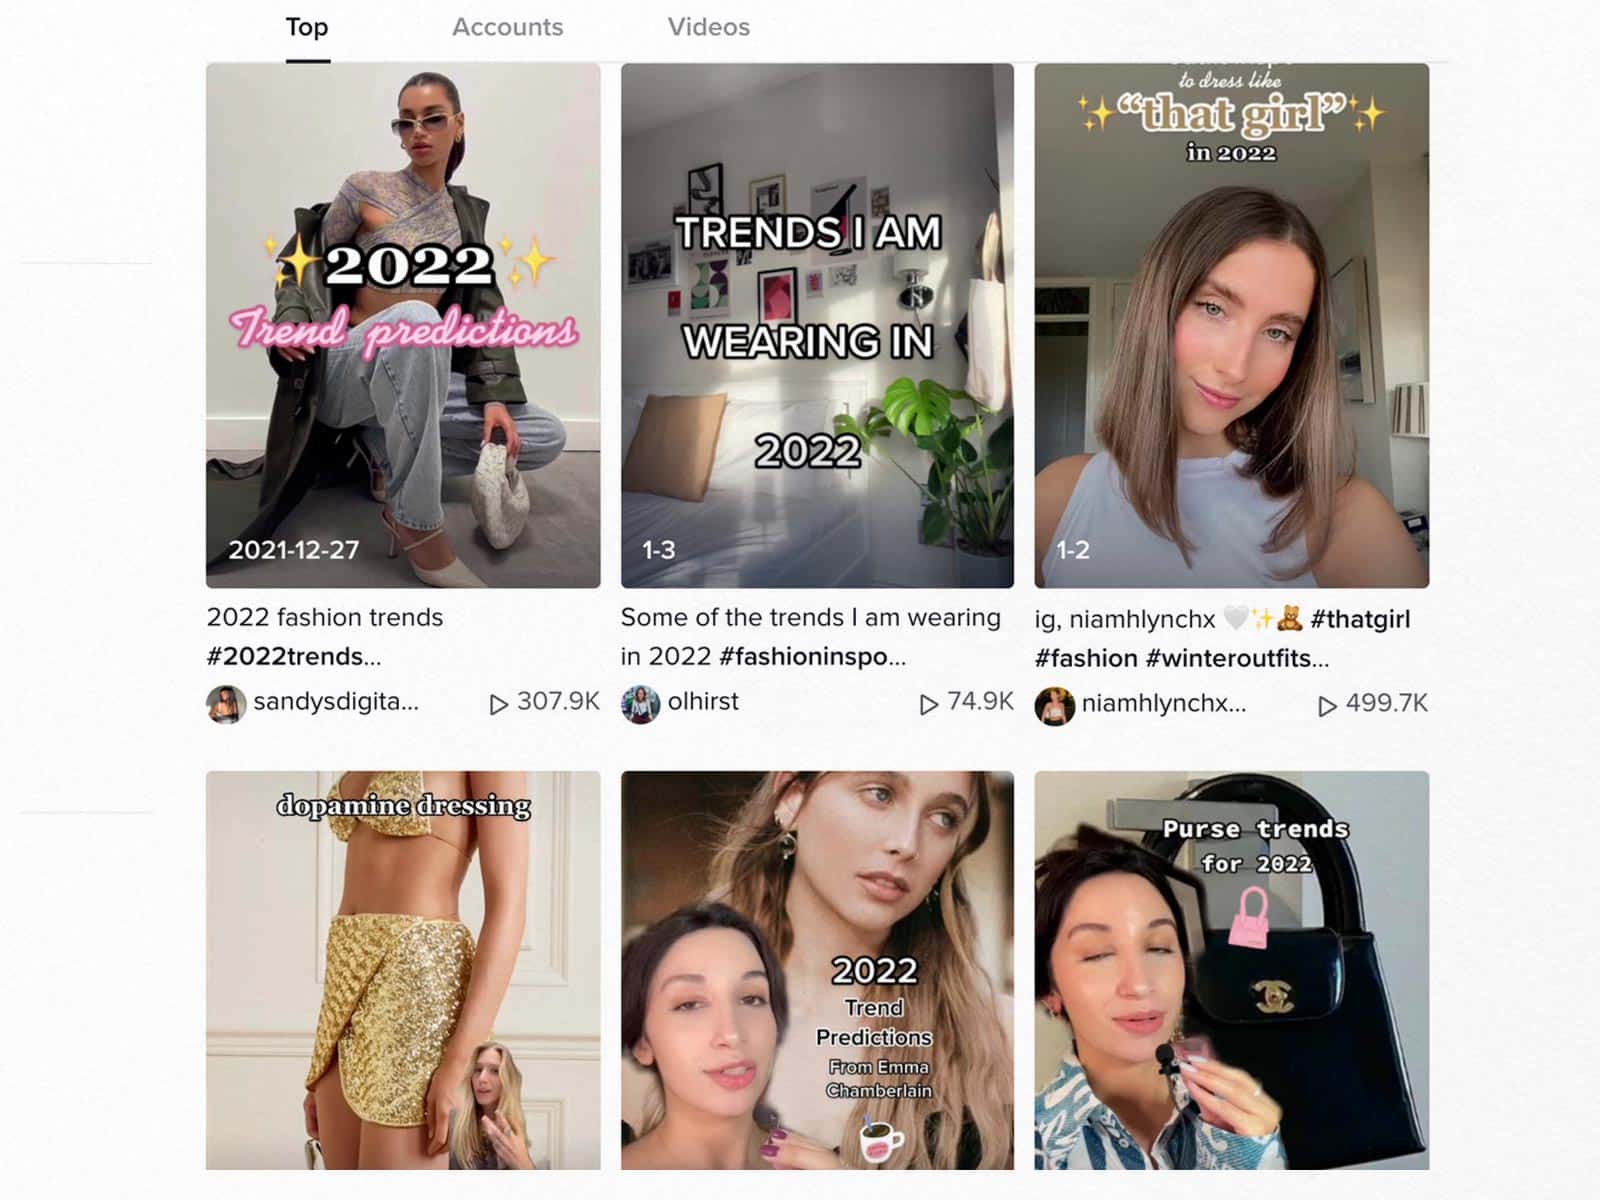 Here’s what brands need to consider to keep Gen Z’s attention